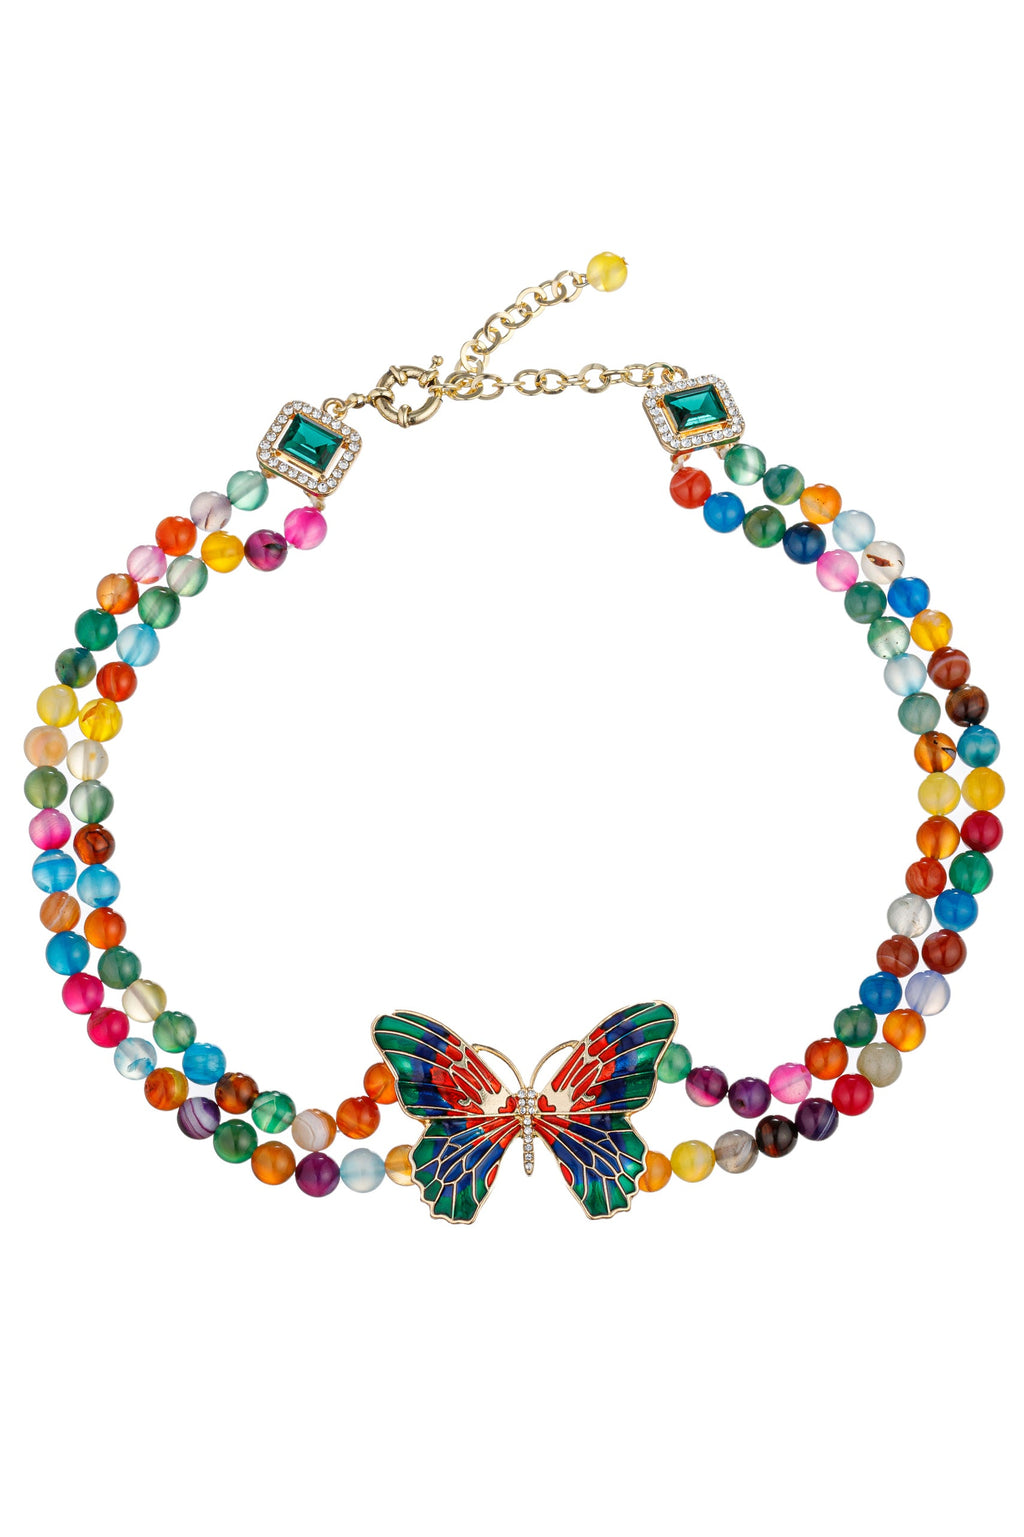 Embrace vibrant beauty with this pendant necklace featuring a beaded monarch butterfly design in a rainbow of colors.